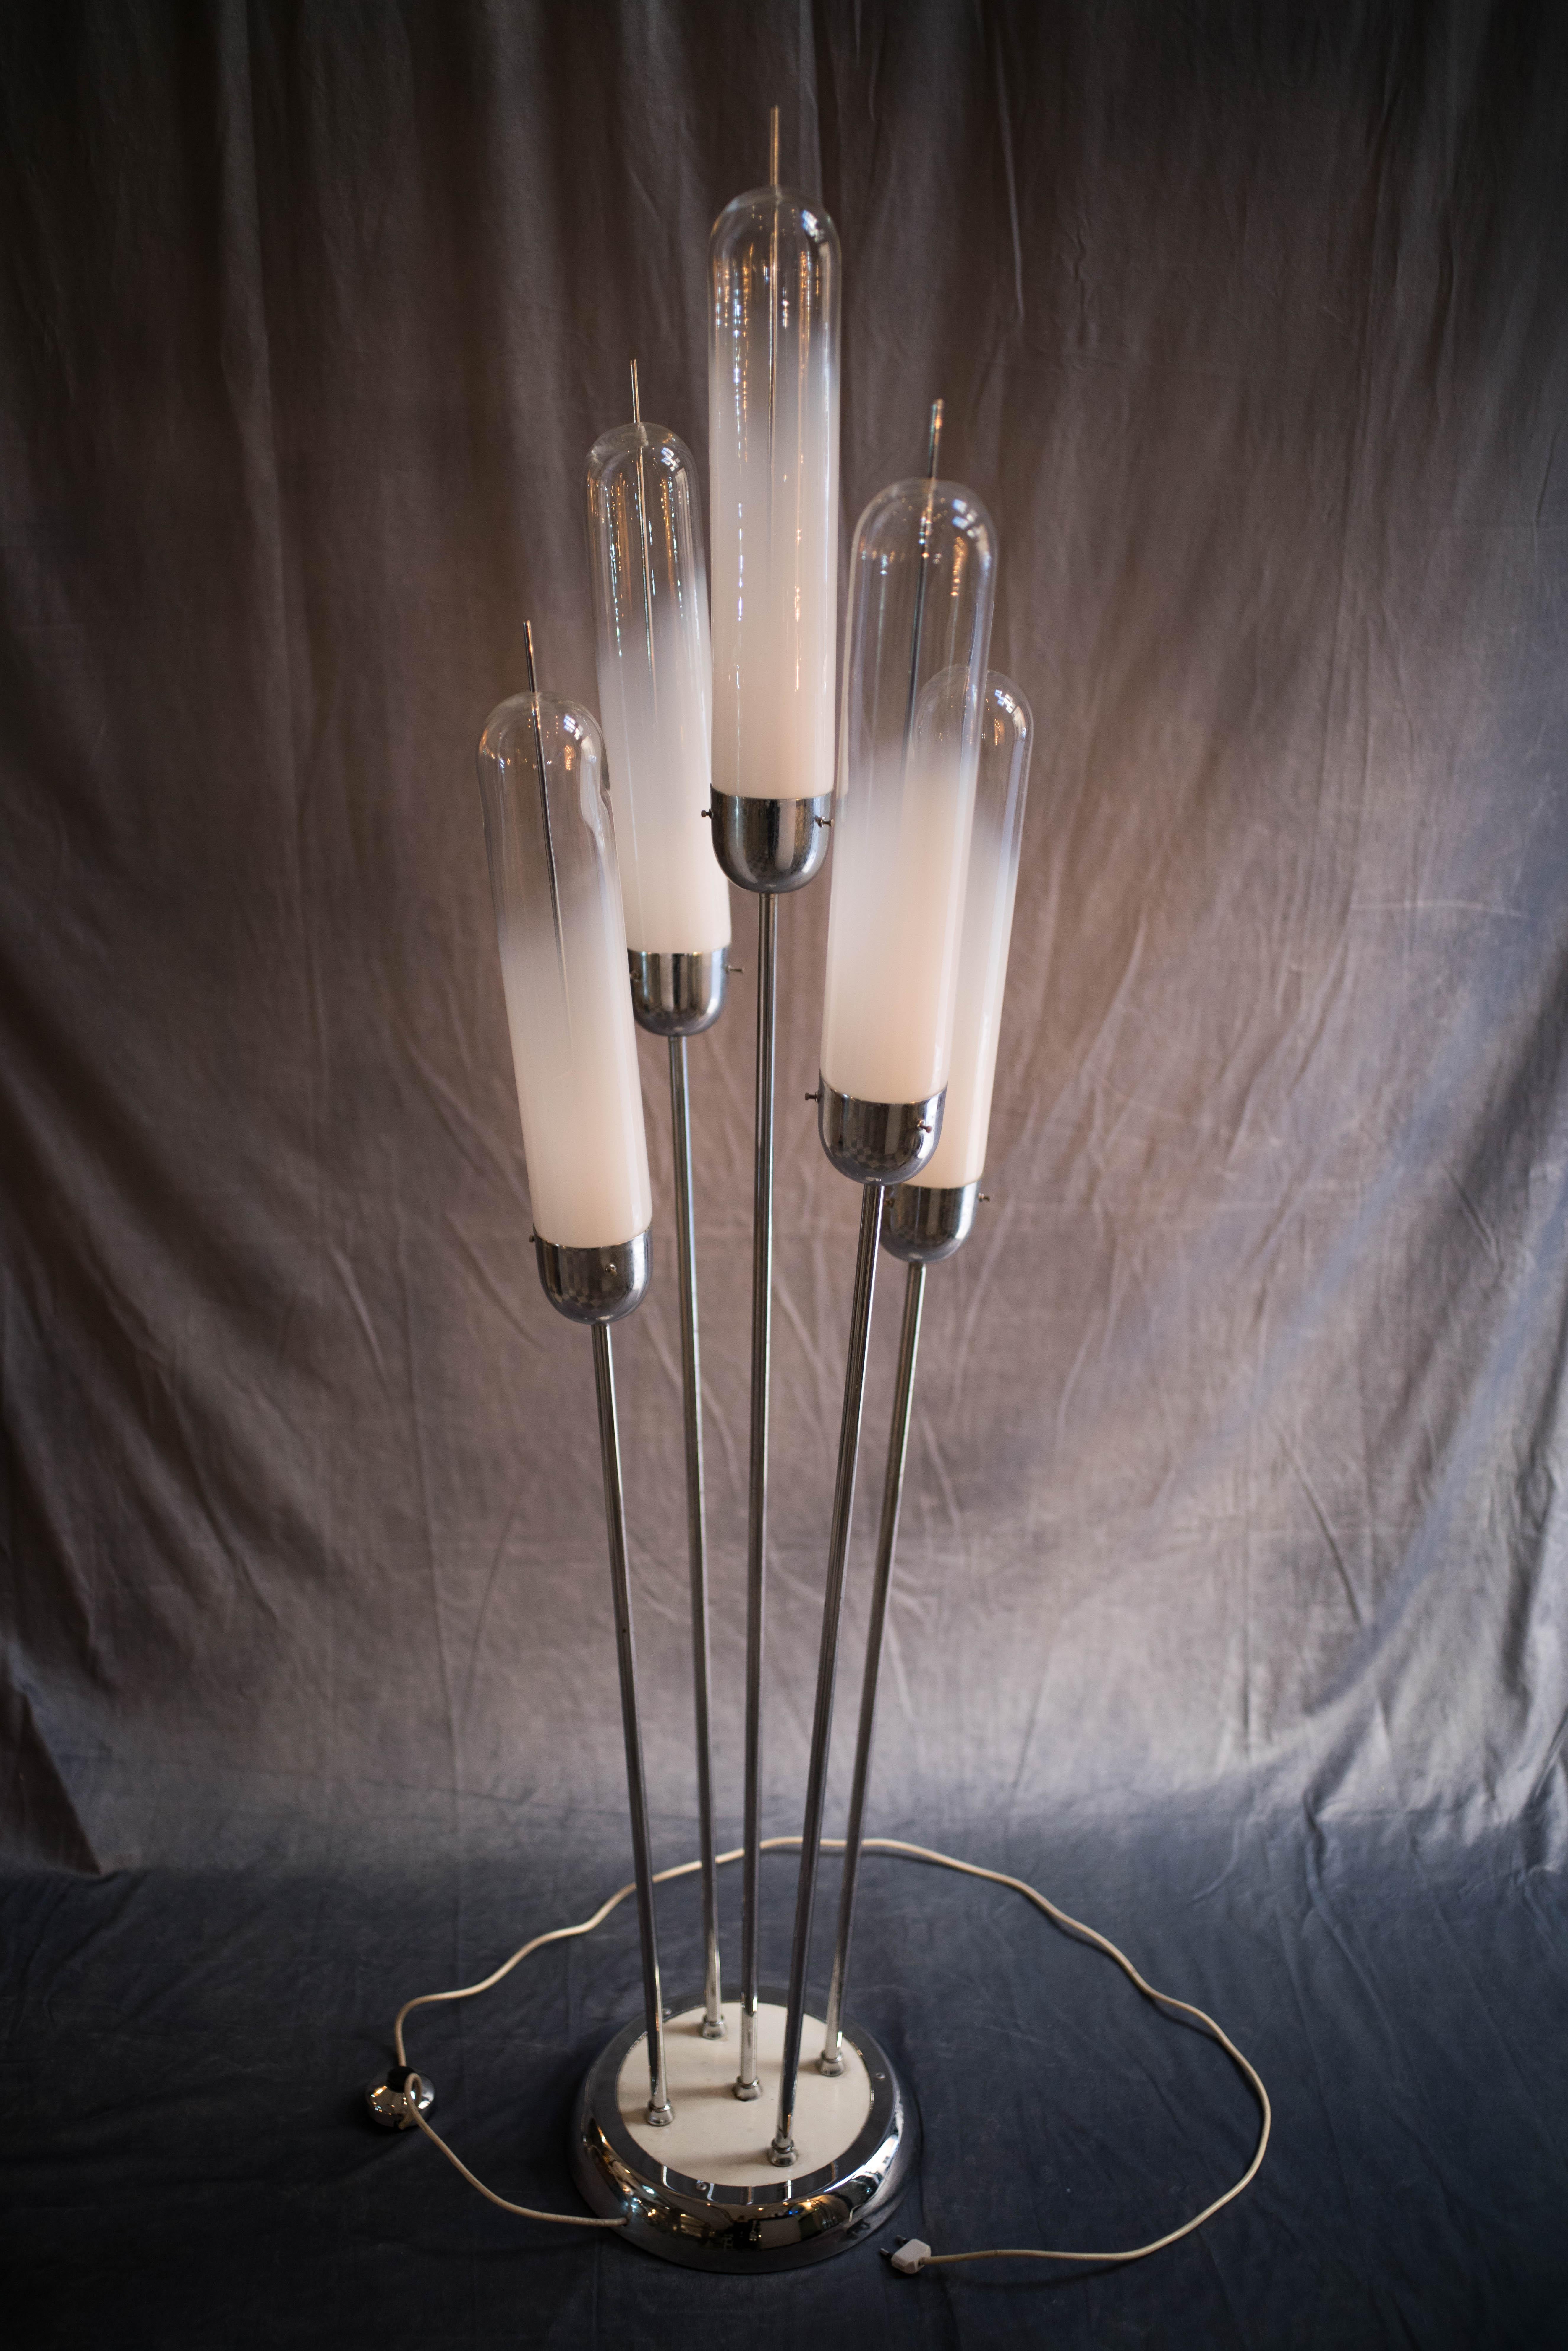 This Reggiani floor lamp is an elegant design lamp designed by Goffredo Reggiani.

A superb floor lamp with five Murano glass lightbulbs.

Very good conditions.

Not much information is available on the biography of the Italian lighting